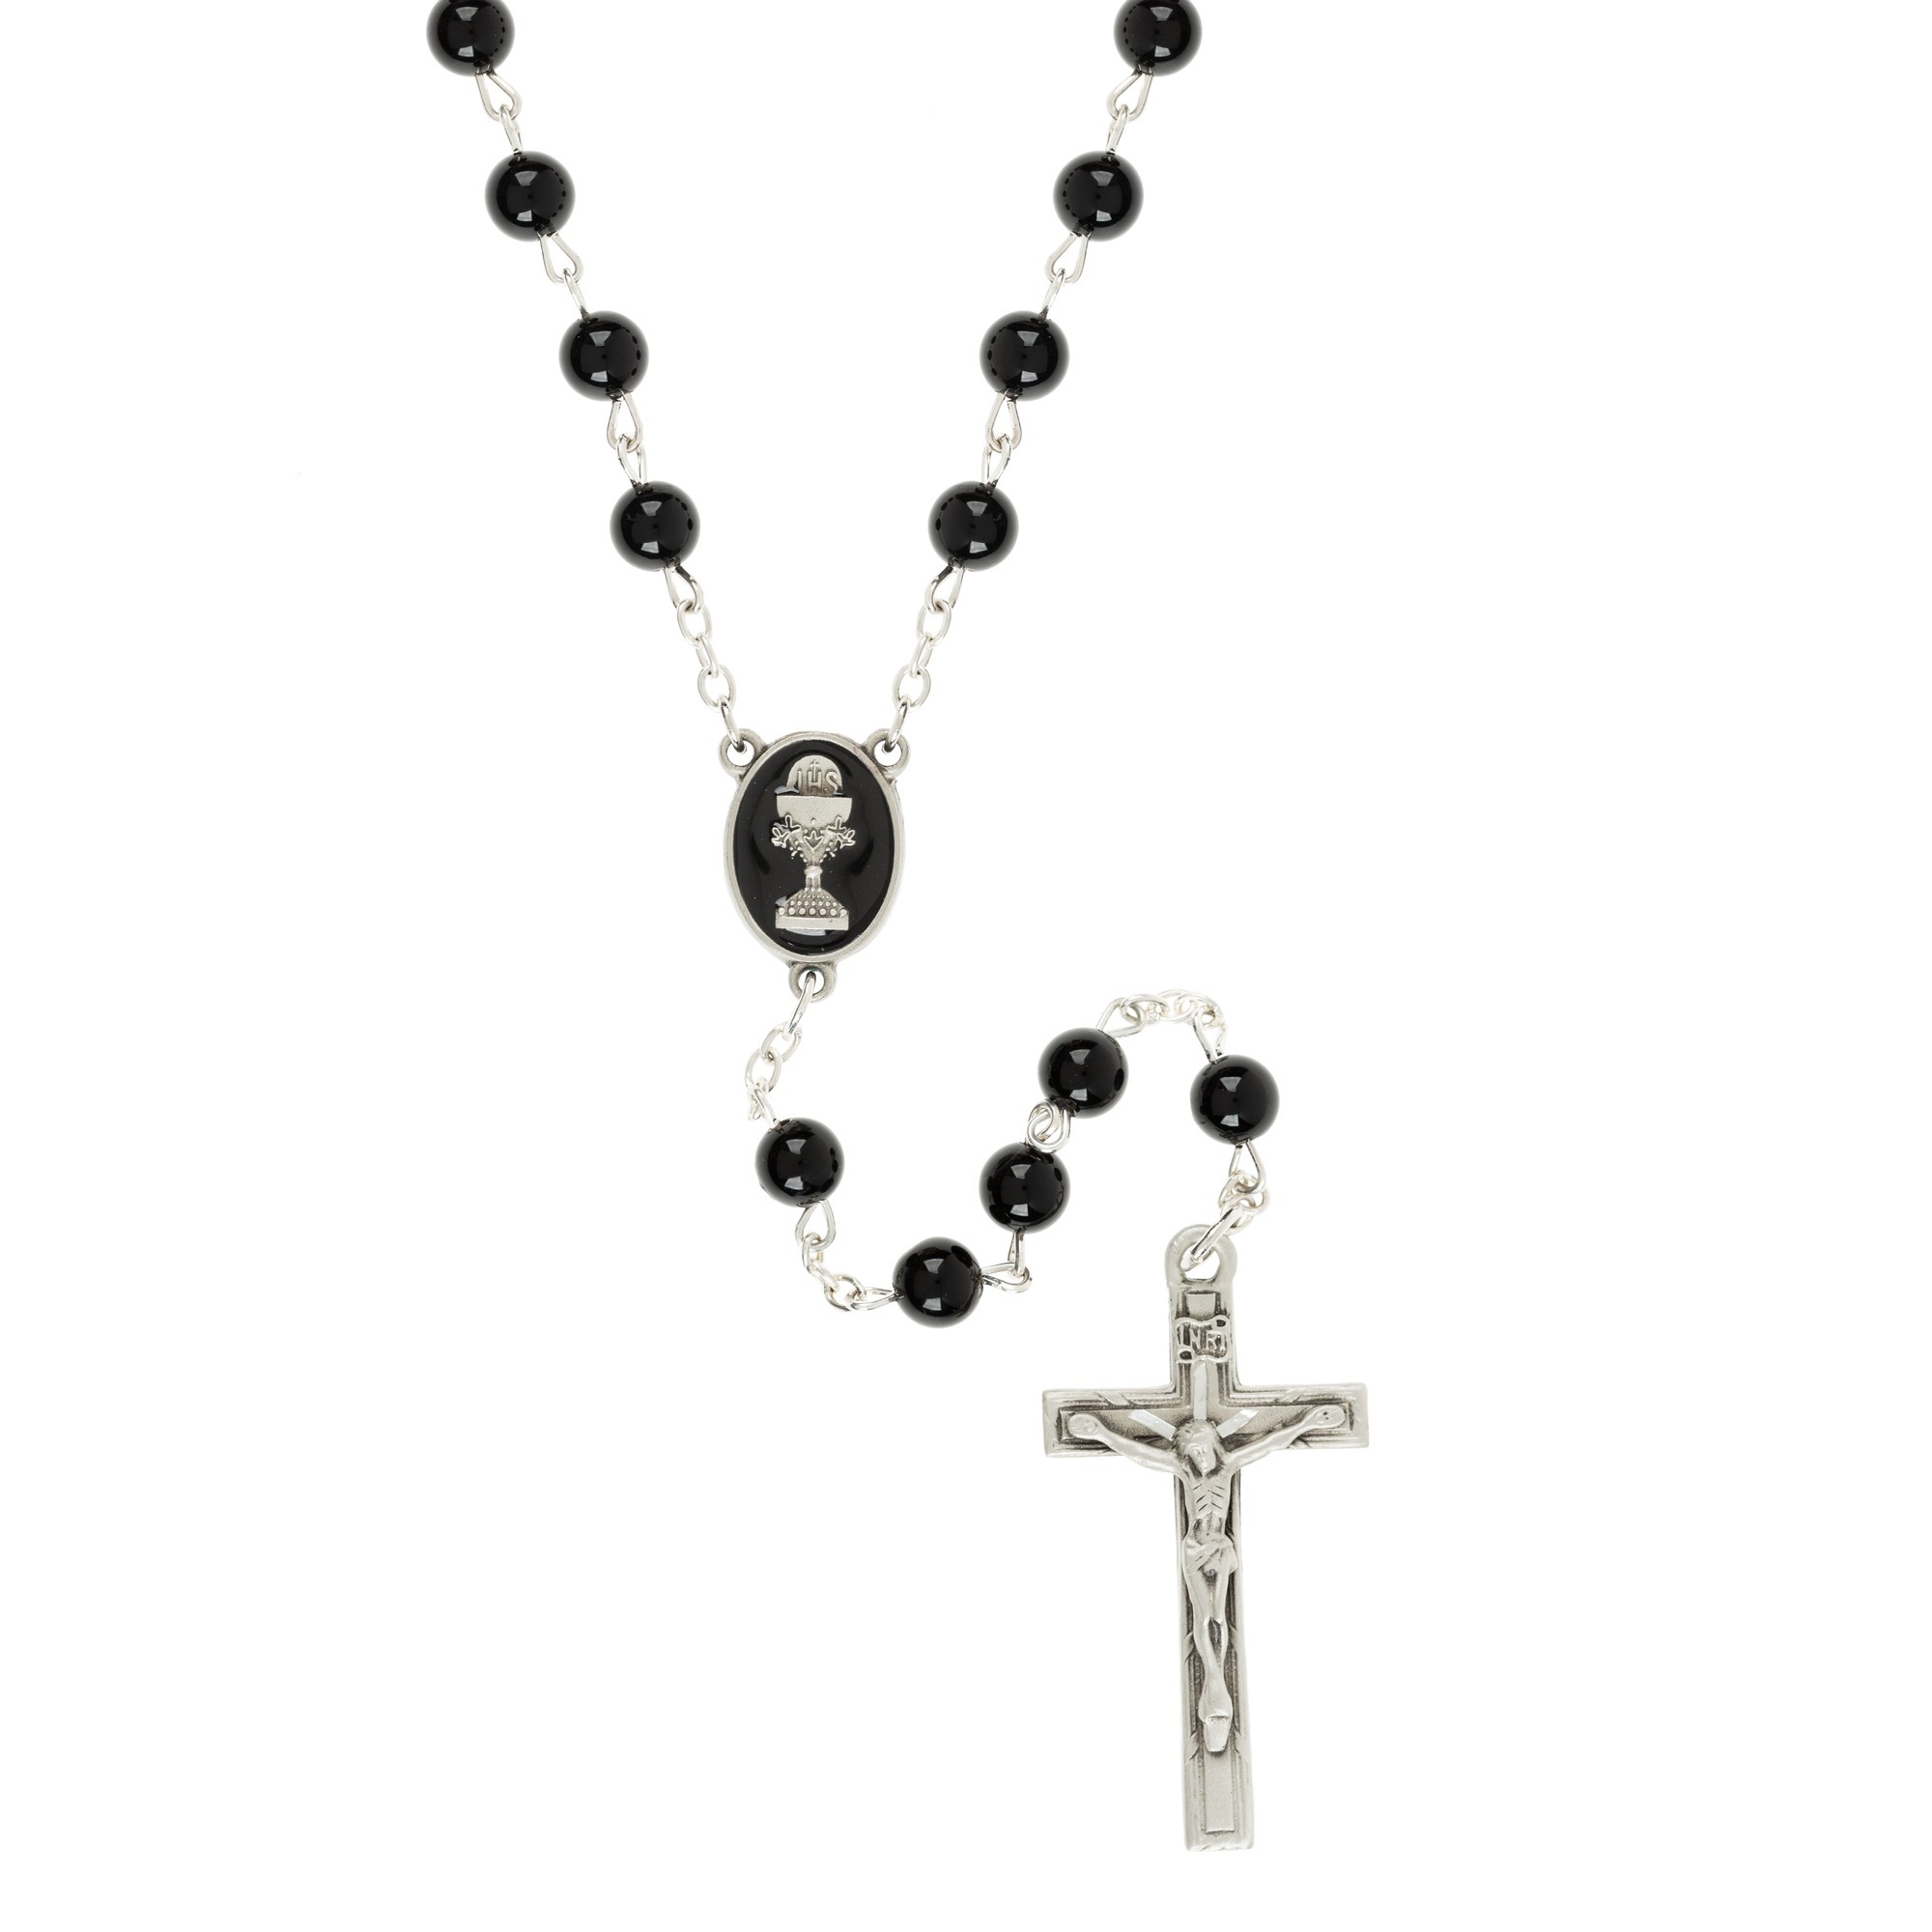 Black Glass First Chalice Communion Rosary | The Catholic Company®